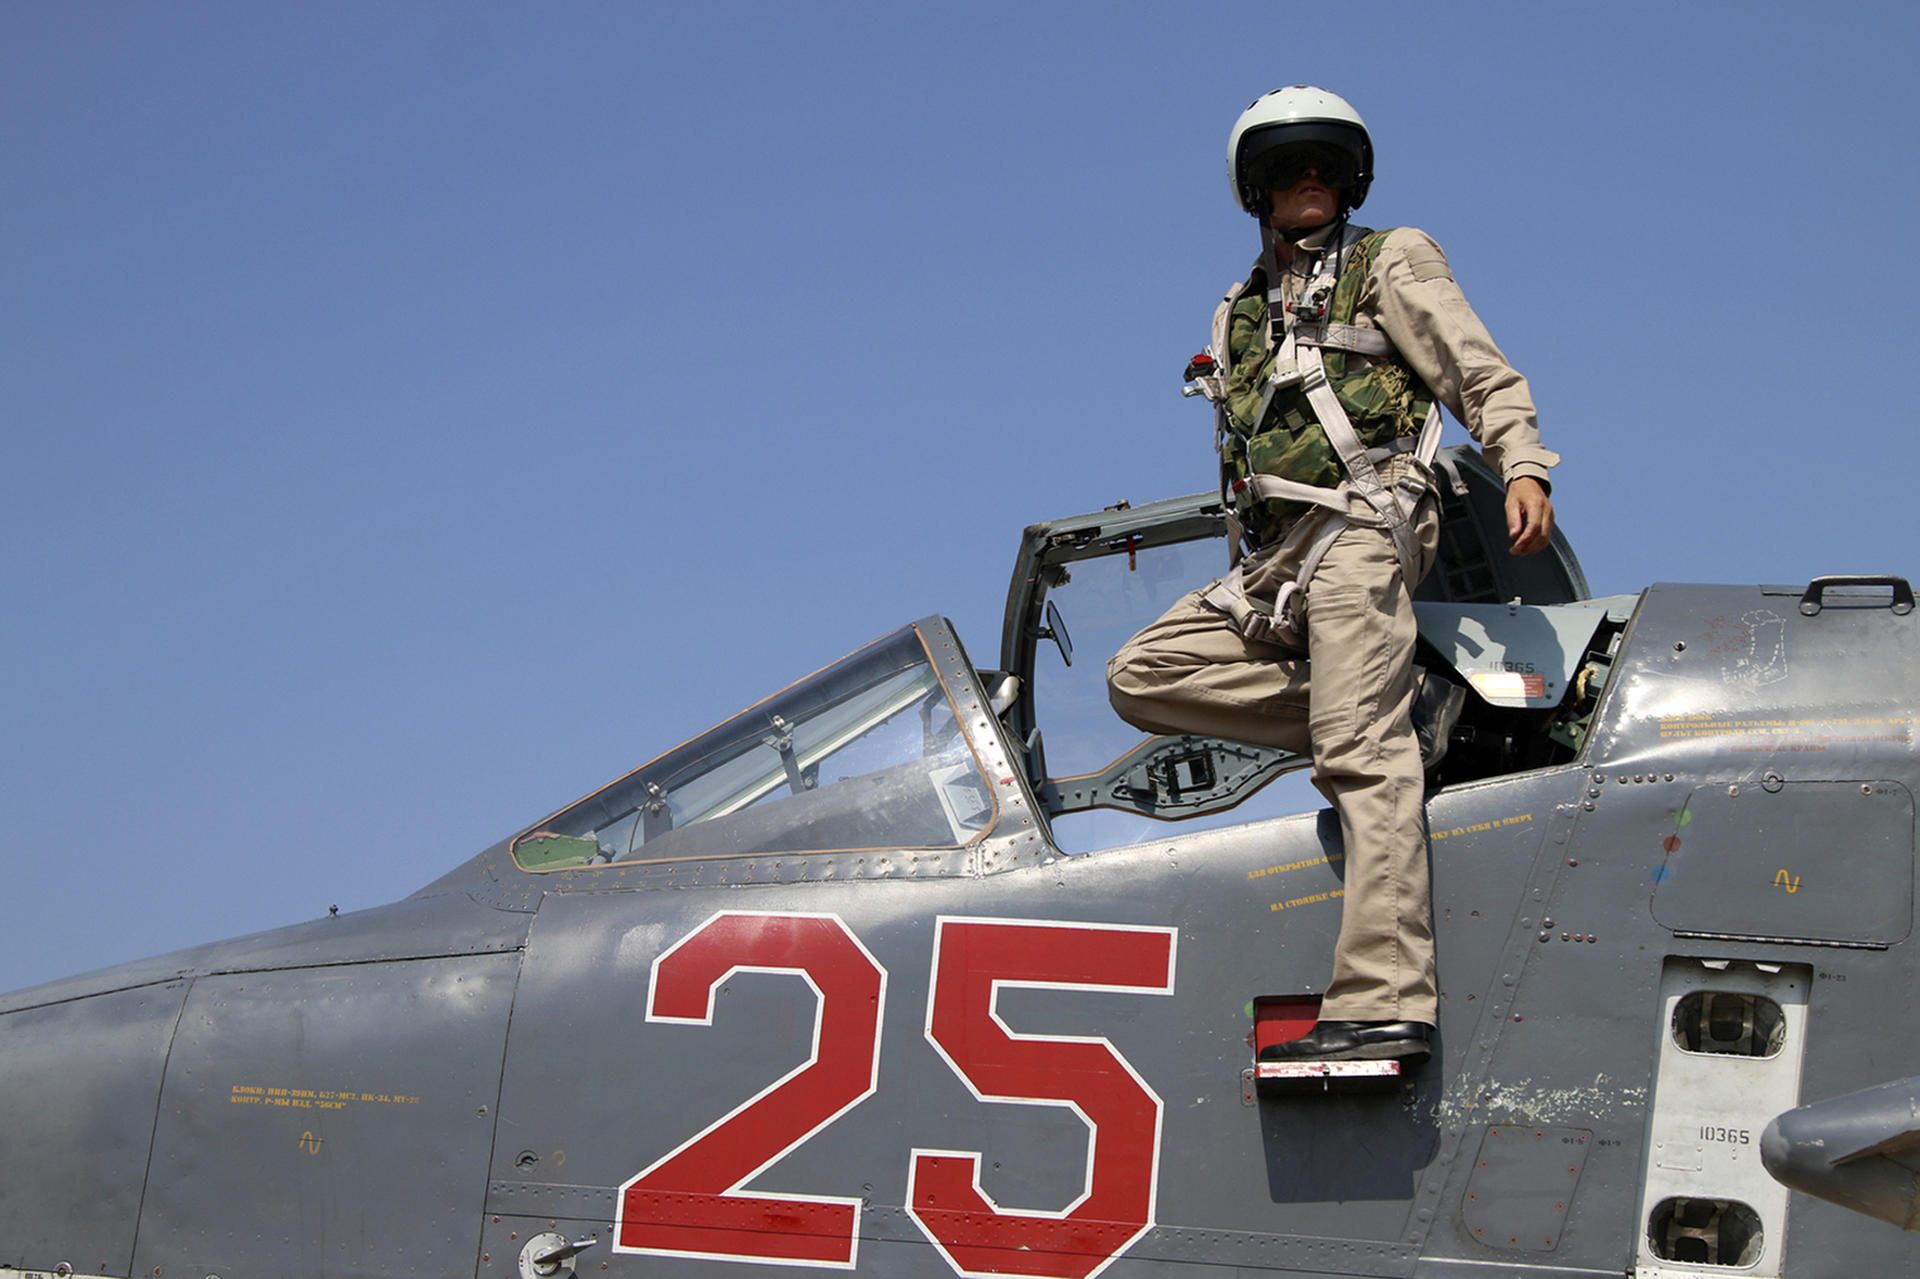 A Russian army pilot with a SU-25M jet fighter at Hmeimim airbase in Syria. Photo: AP